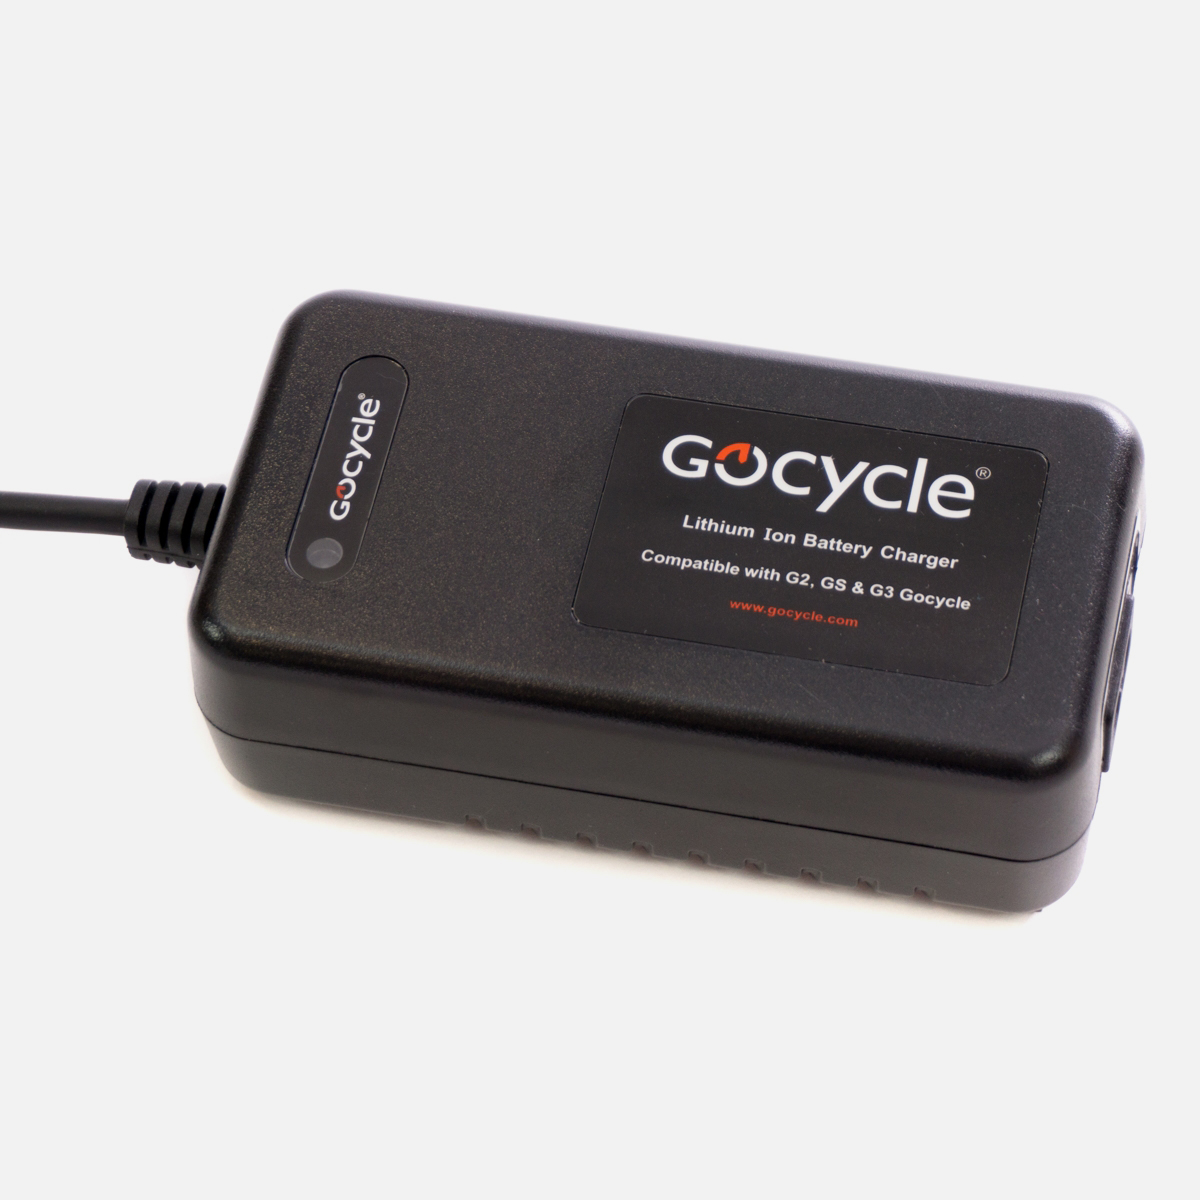 Gocycle Battery Charger - 2 Amp